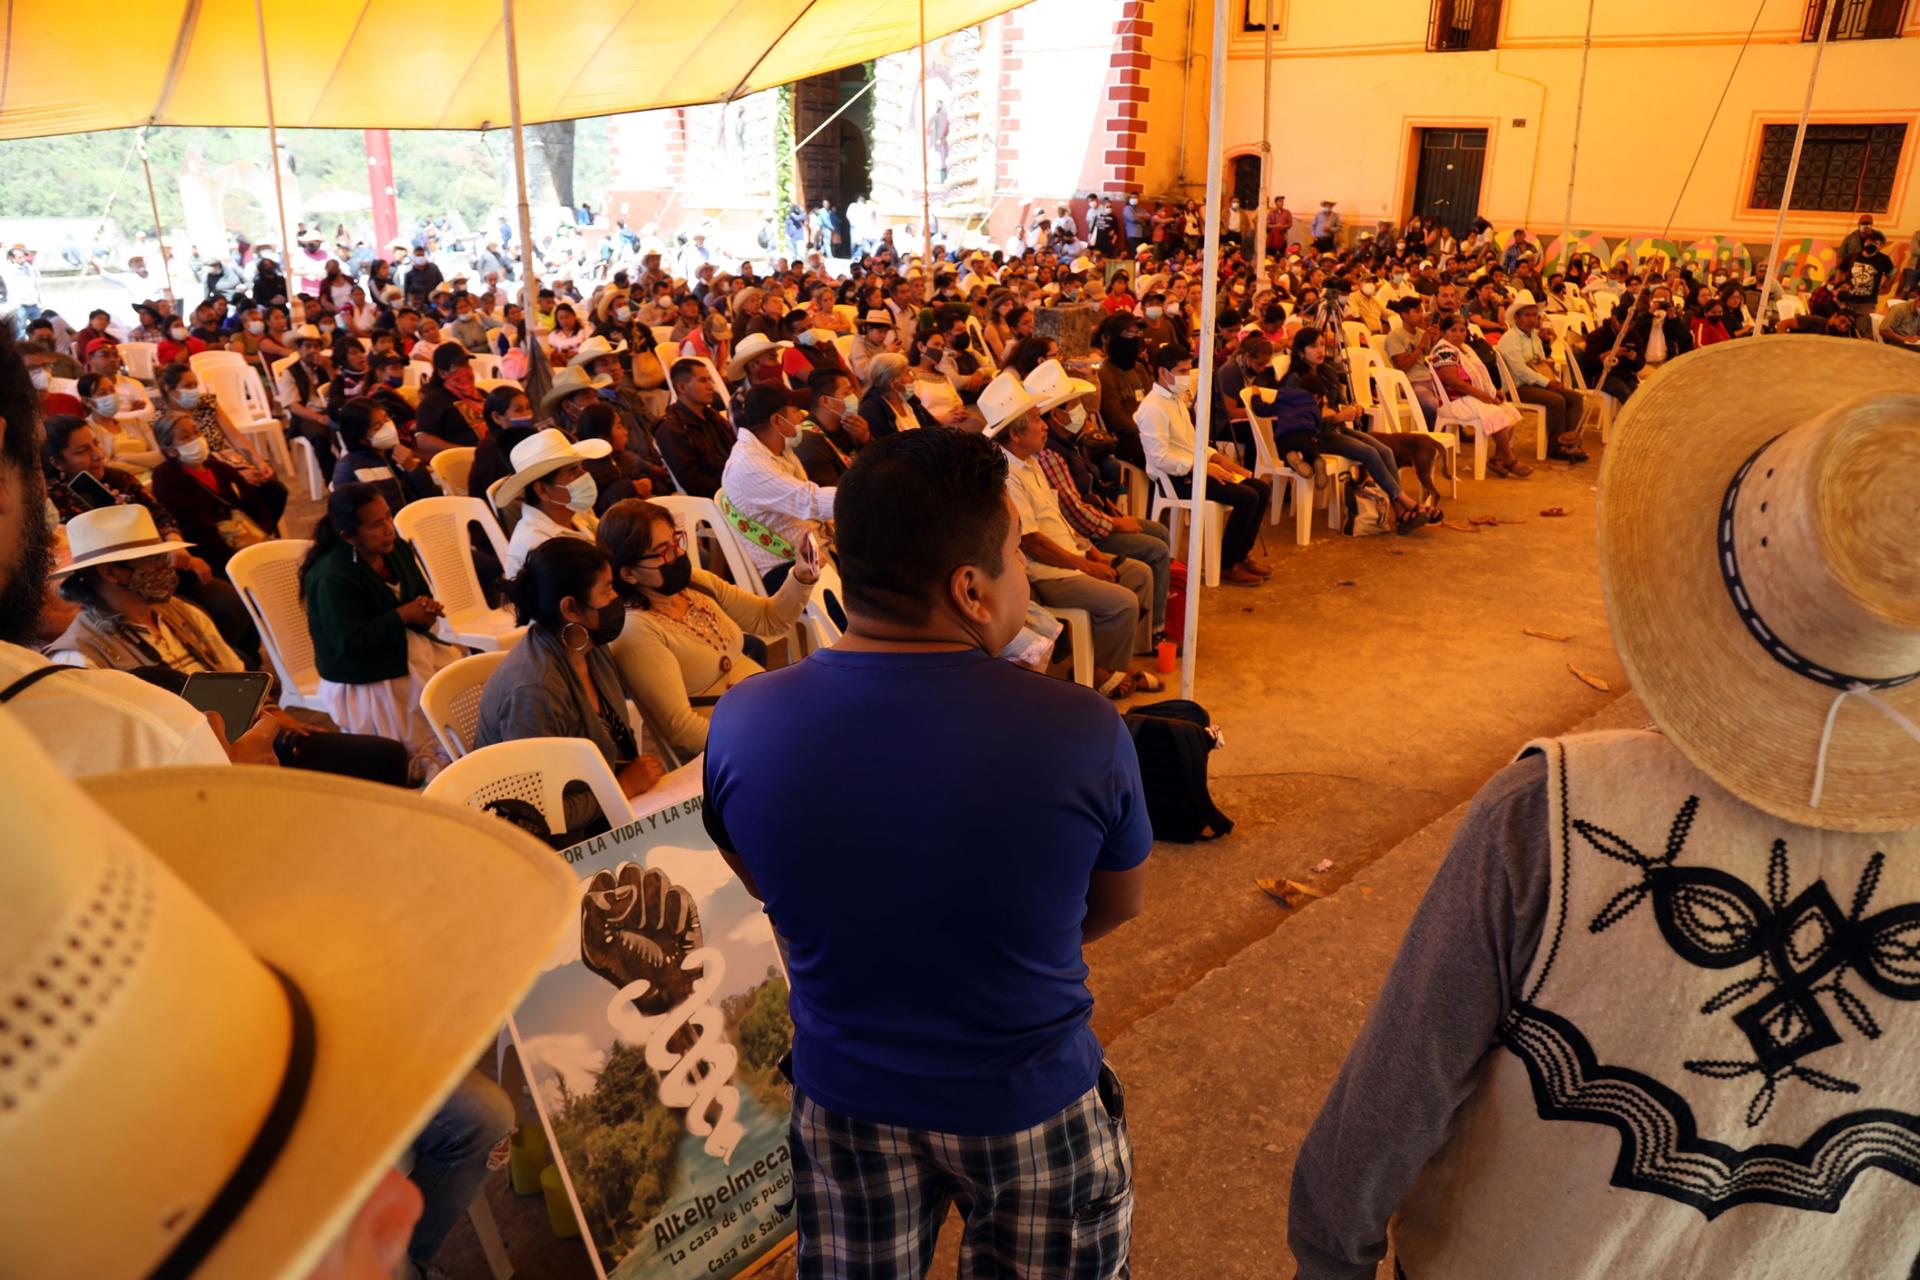 Hundreds of Indigenous people in the highland town of Ahuacatlán celebrated recent court victories that canceled mining projects in their areas. 